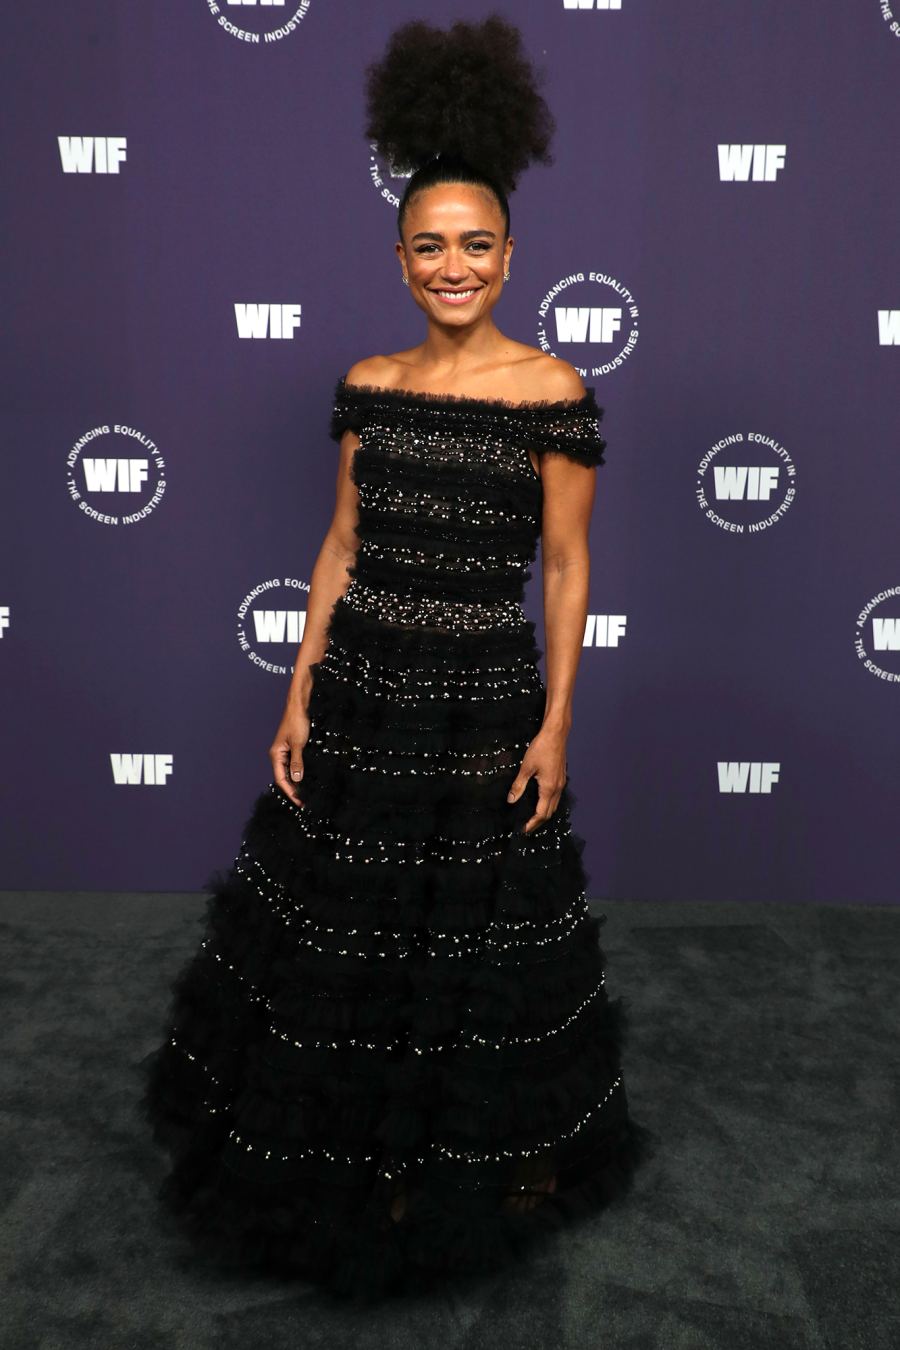 Women in Film Honors Gala Red Carpet Fashion: See What the Stars Wore